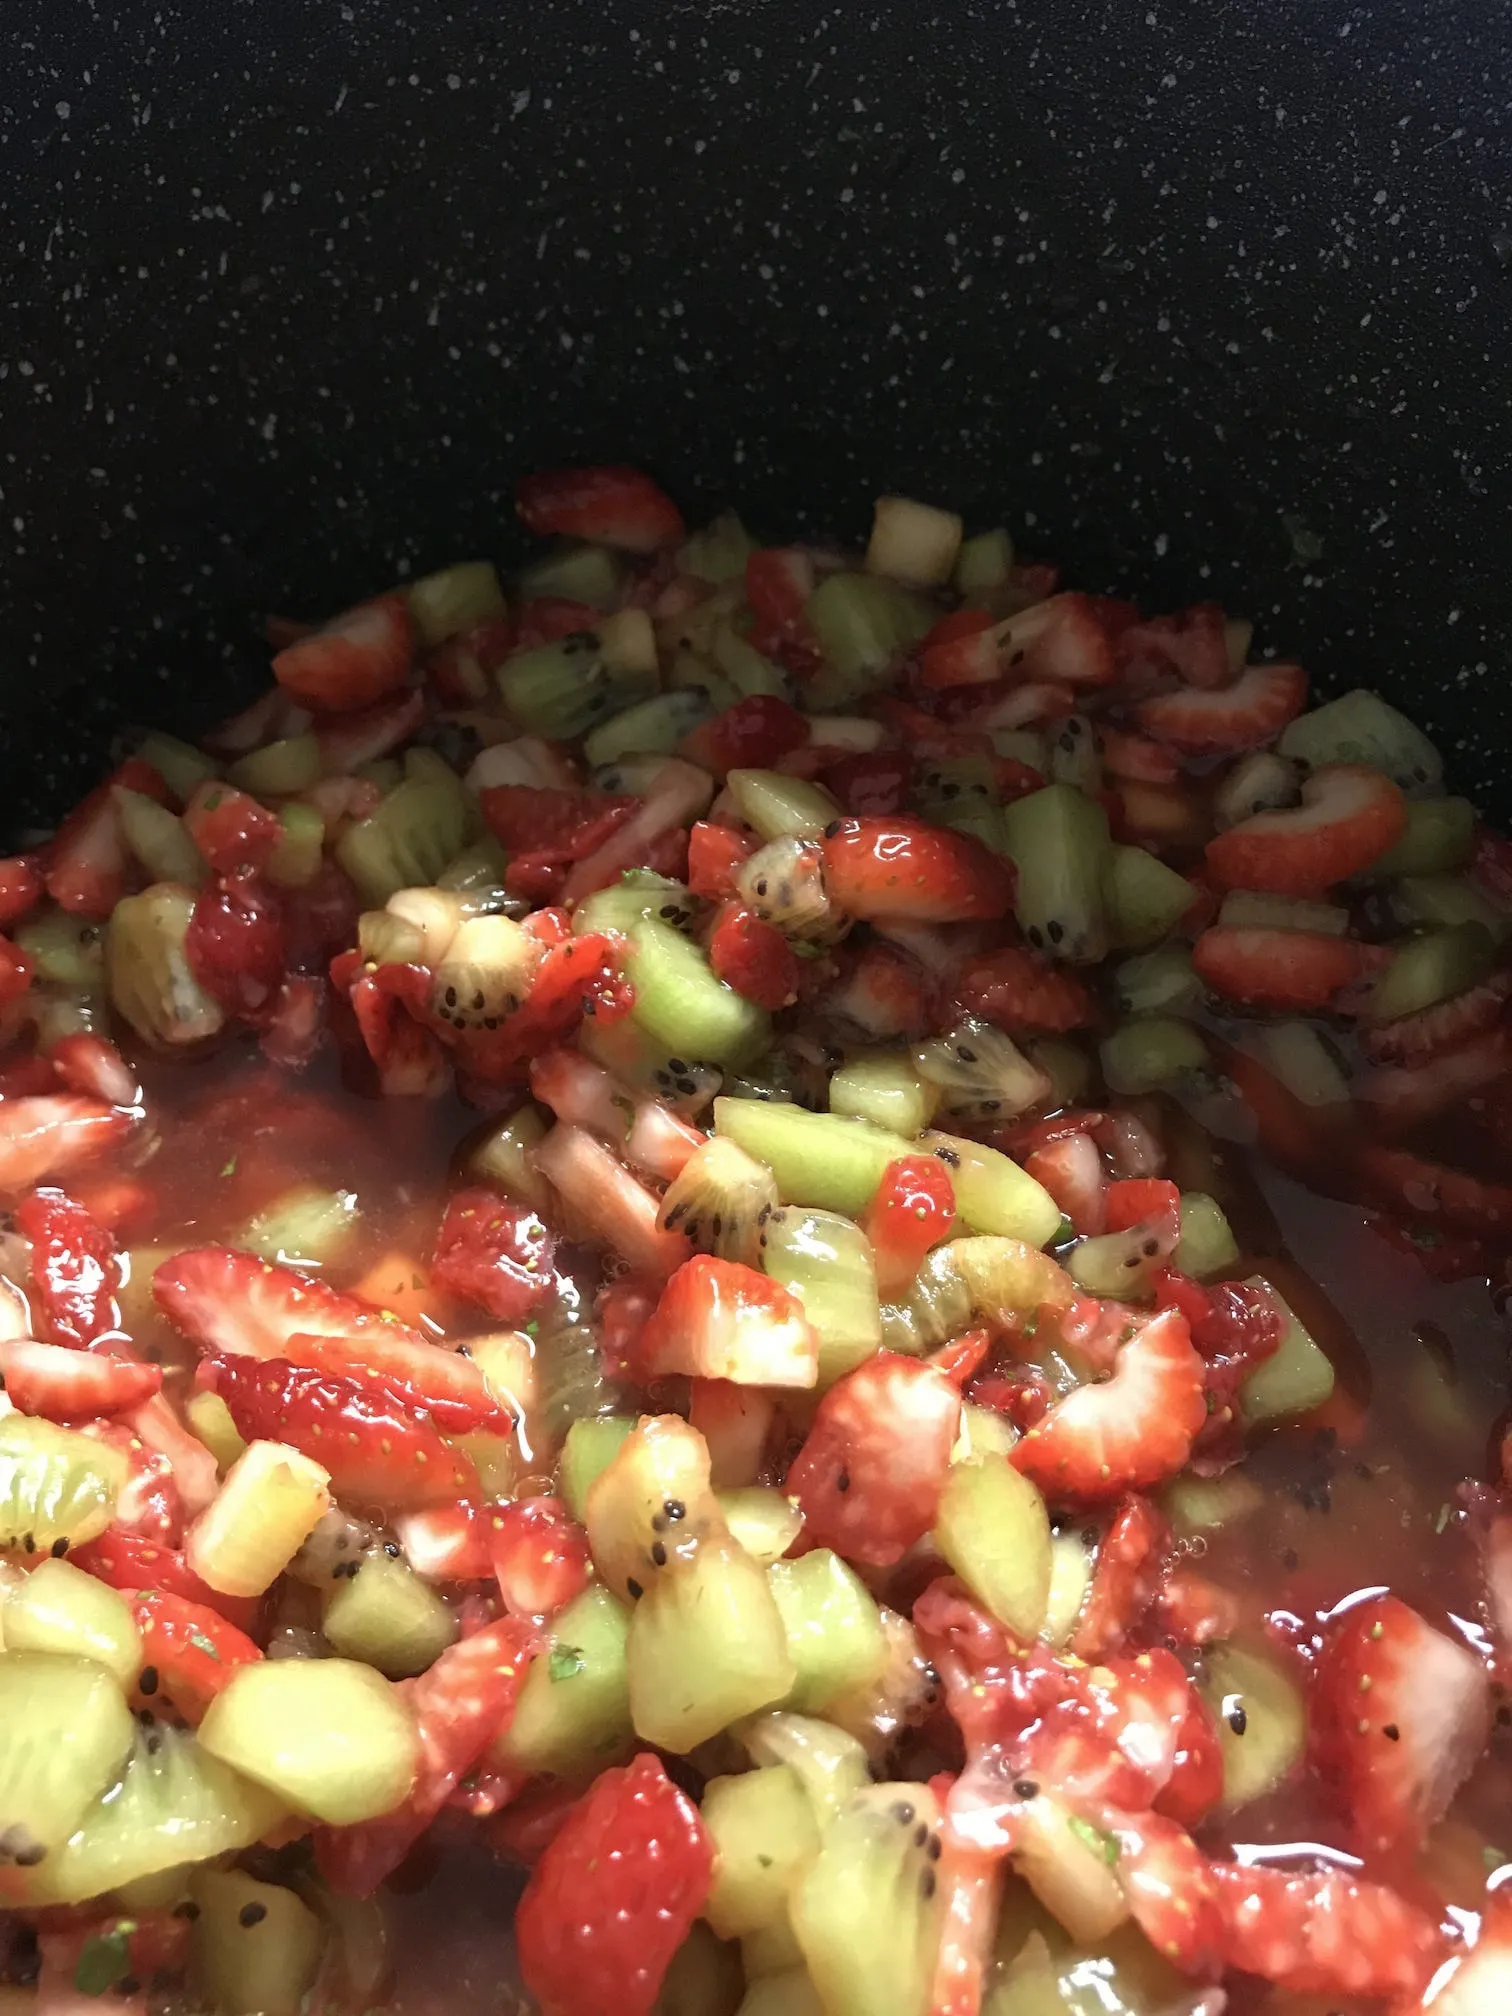 Closeup of strawberries and kiwis reducing in a pot